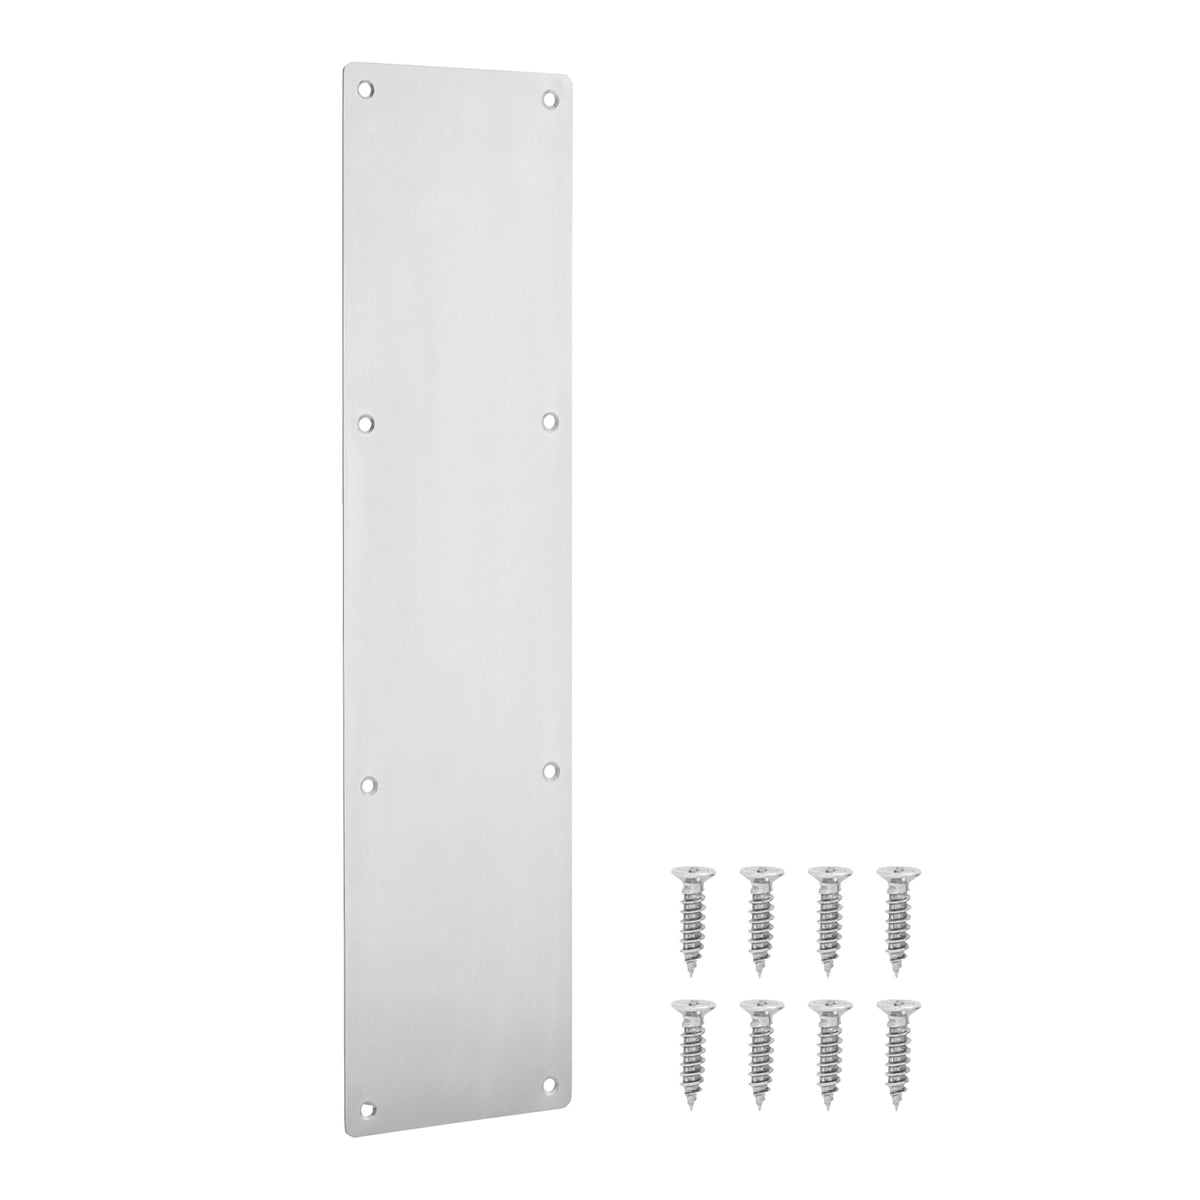 Plastic Door Finger Plates White x 2 Good Quality Easy to Fit push plates 